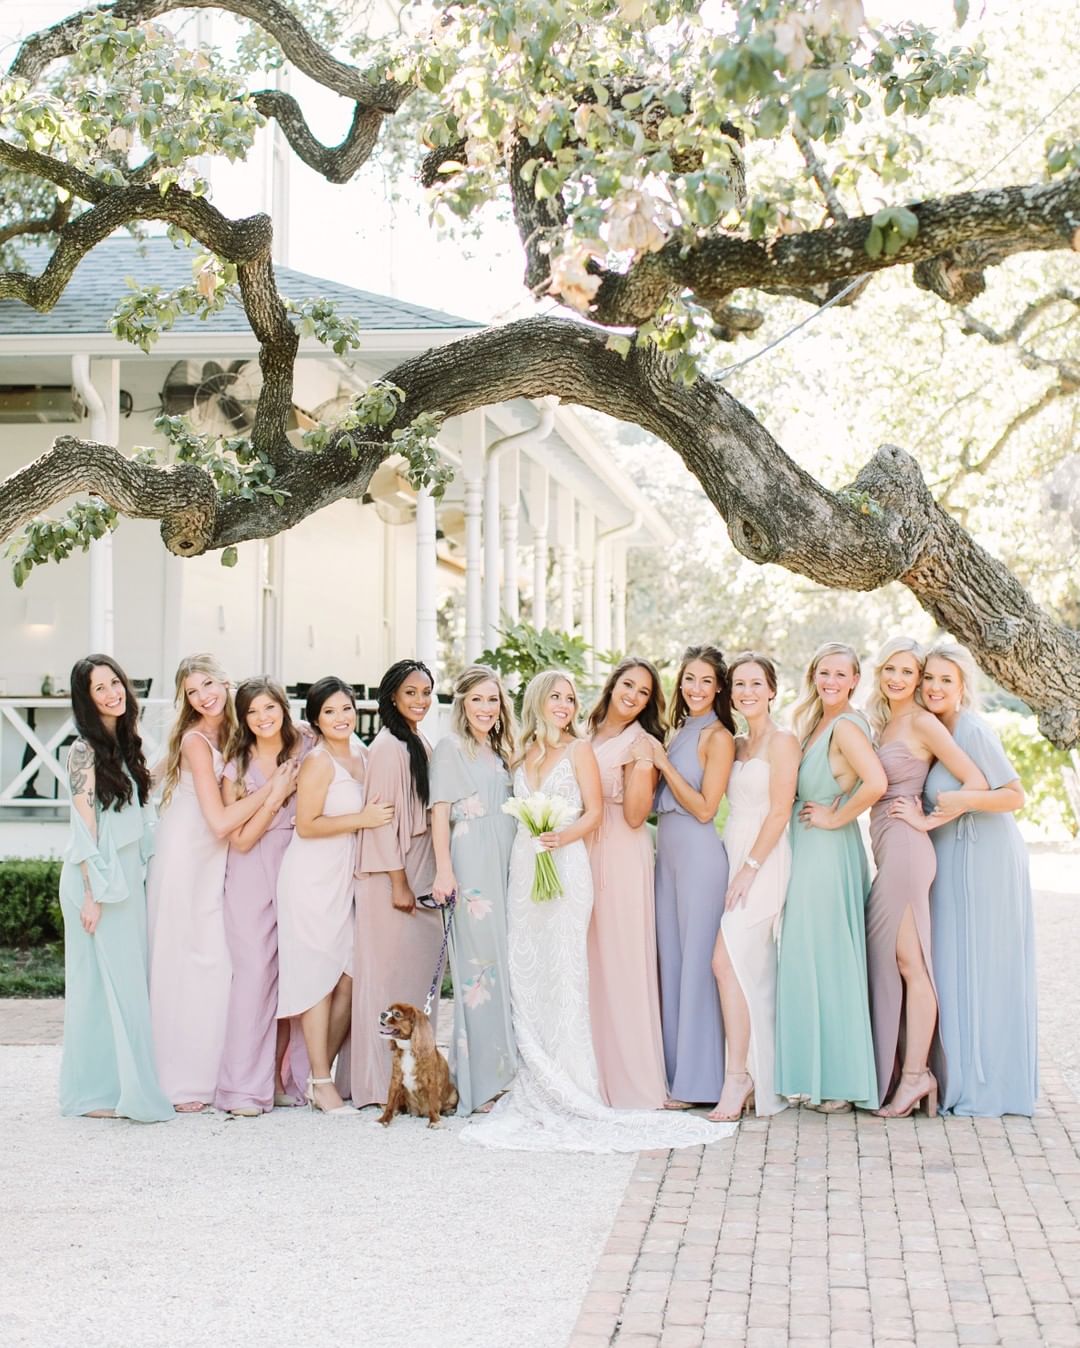 FAQ: What Are the Typical Bridesmaid Responsibilities?